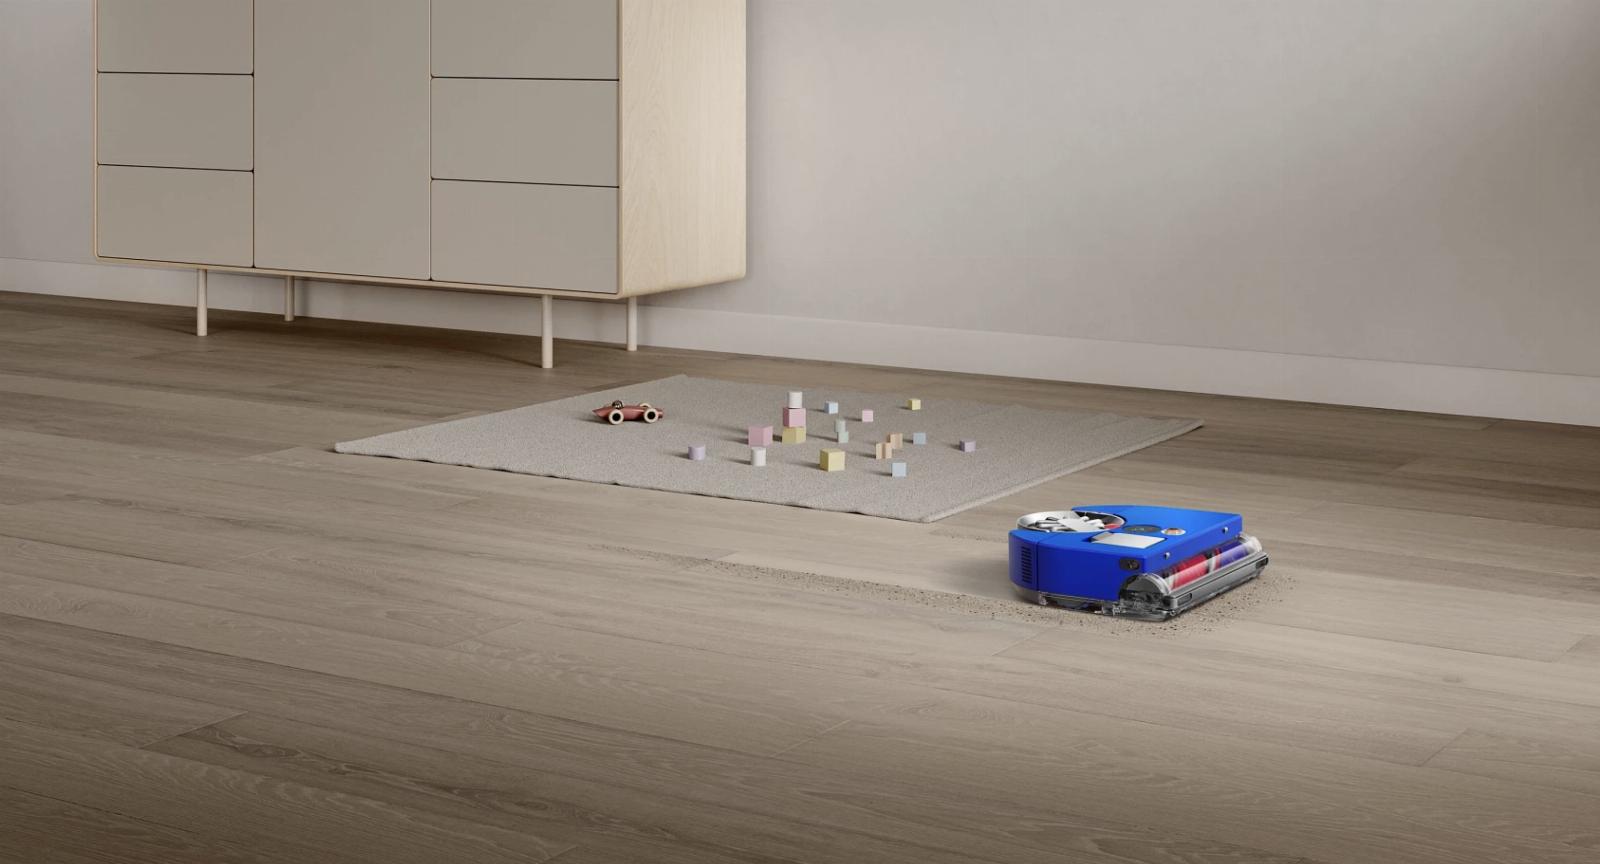 Dyson upgrades its vacuums and air purifiers